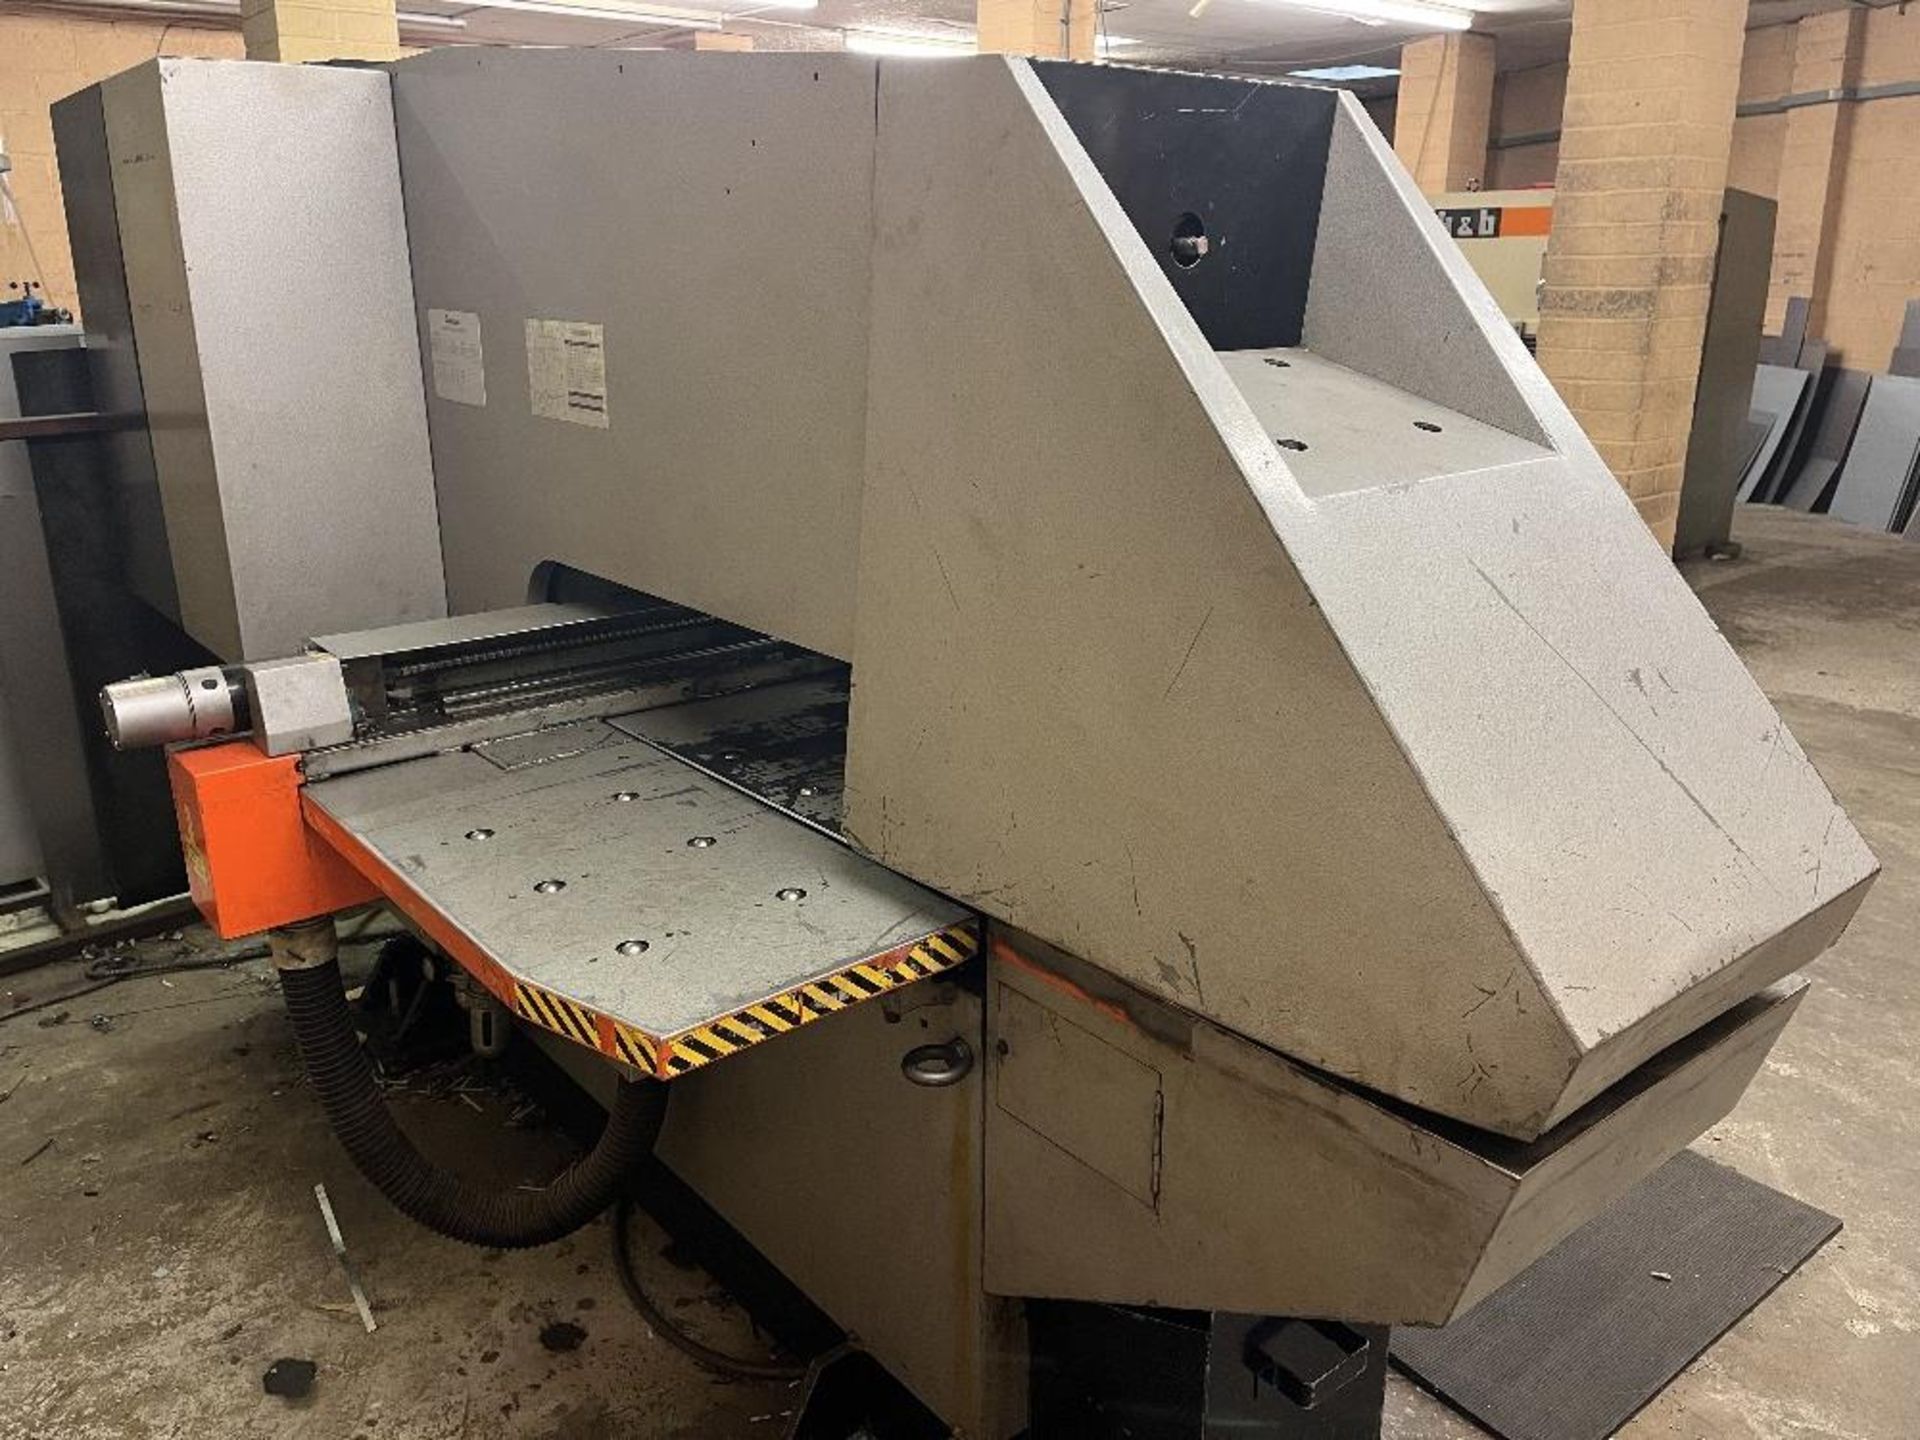 Amada Aries 222 NC turret punching machine No. inaccessible With Amada 03P control - Image 5 of 15